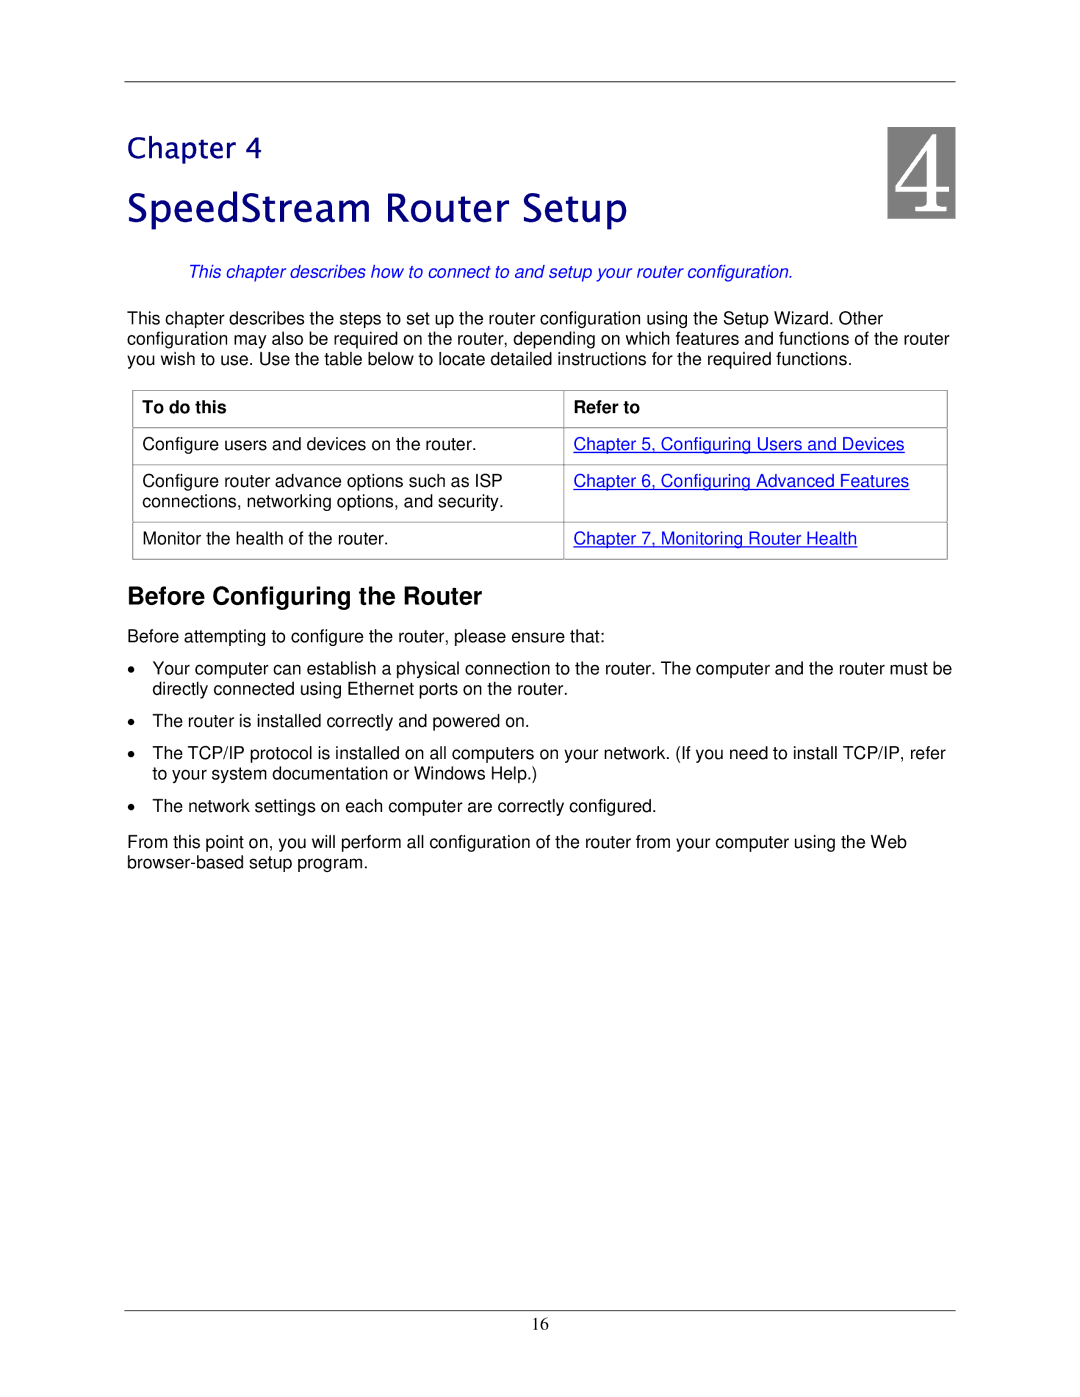 Siemens 5450 manual SpeedStream Router Setup, Before Configuring the Router, To do this Refer to 